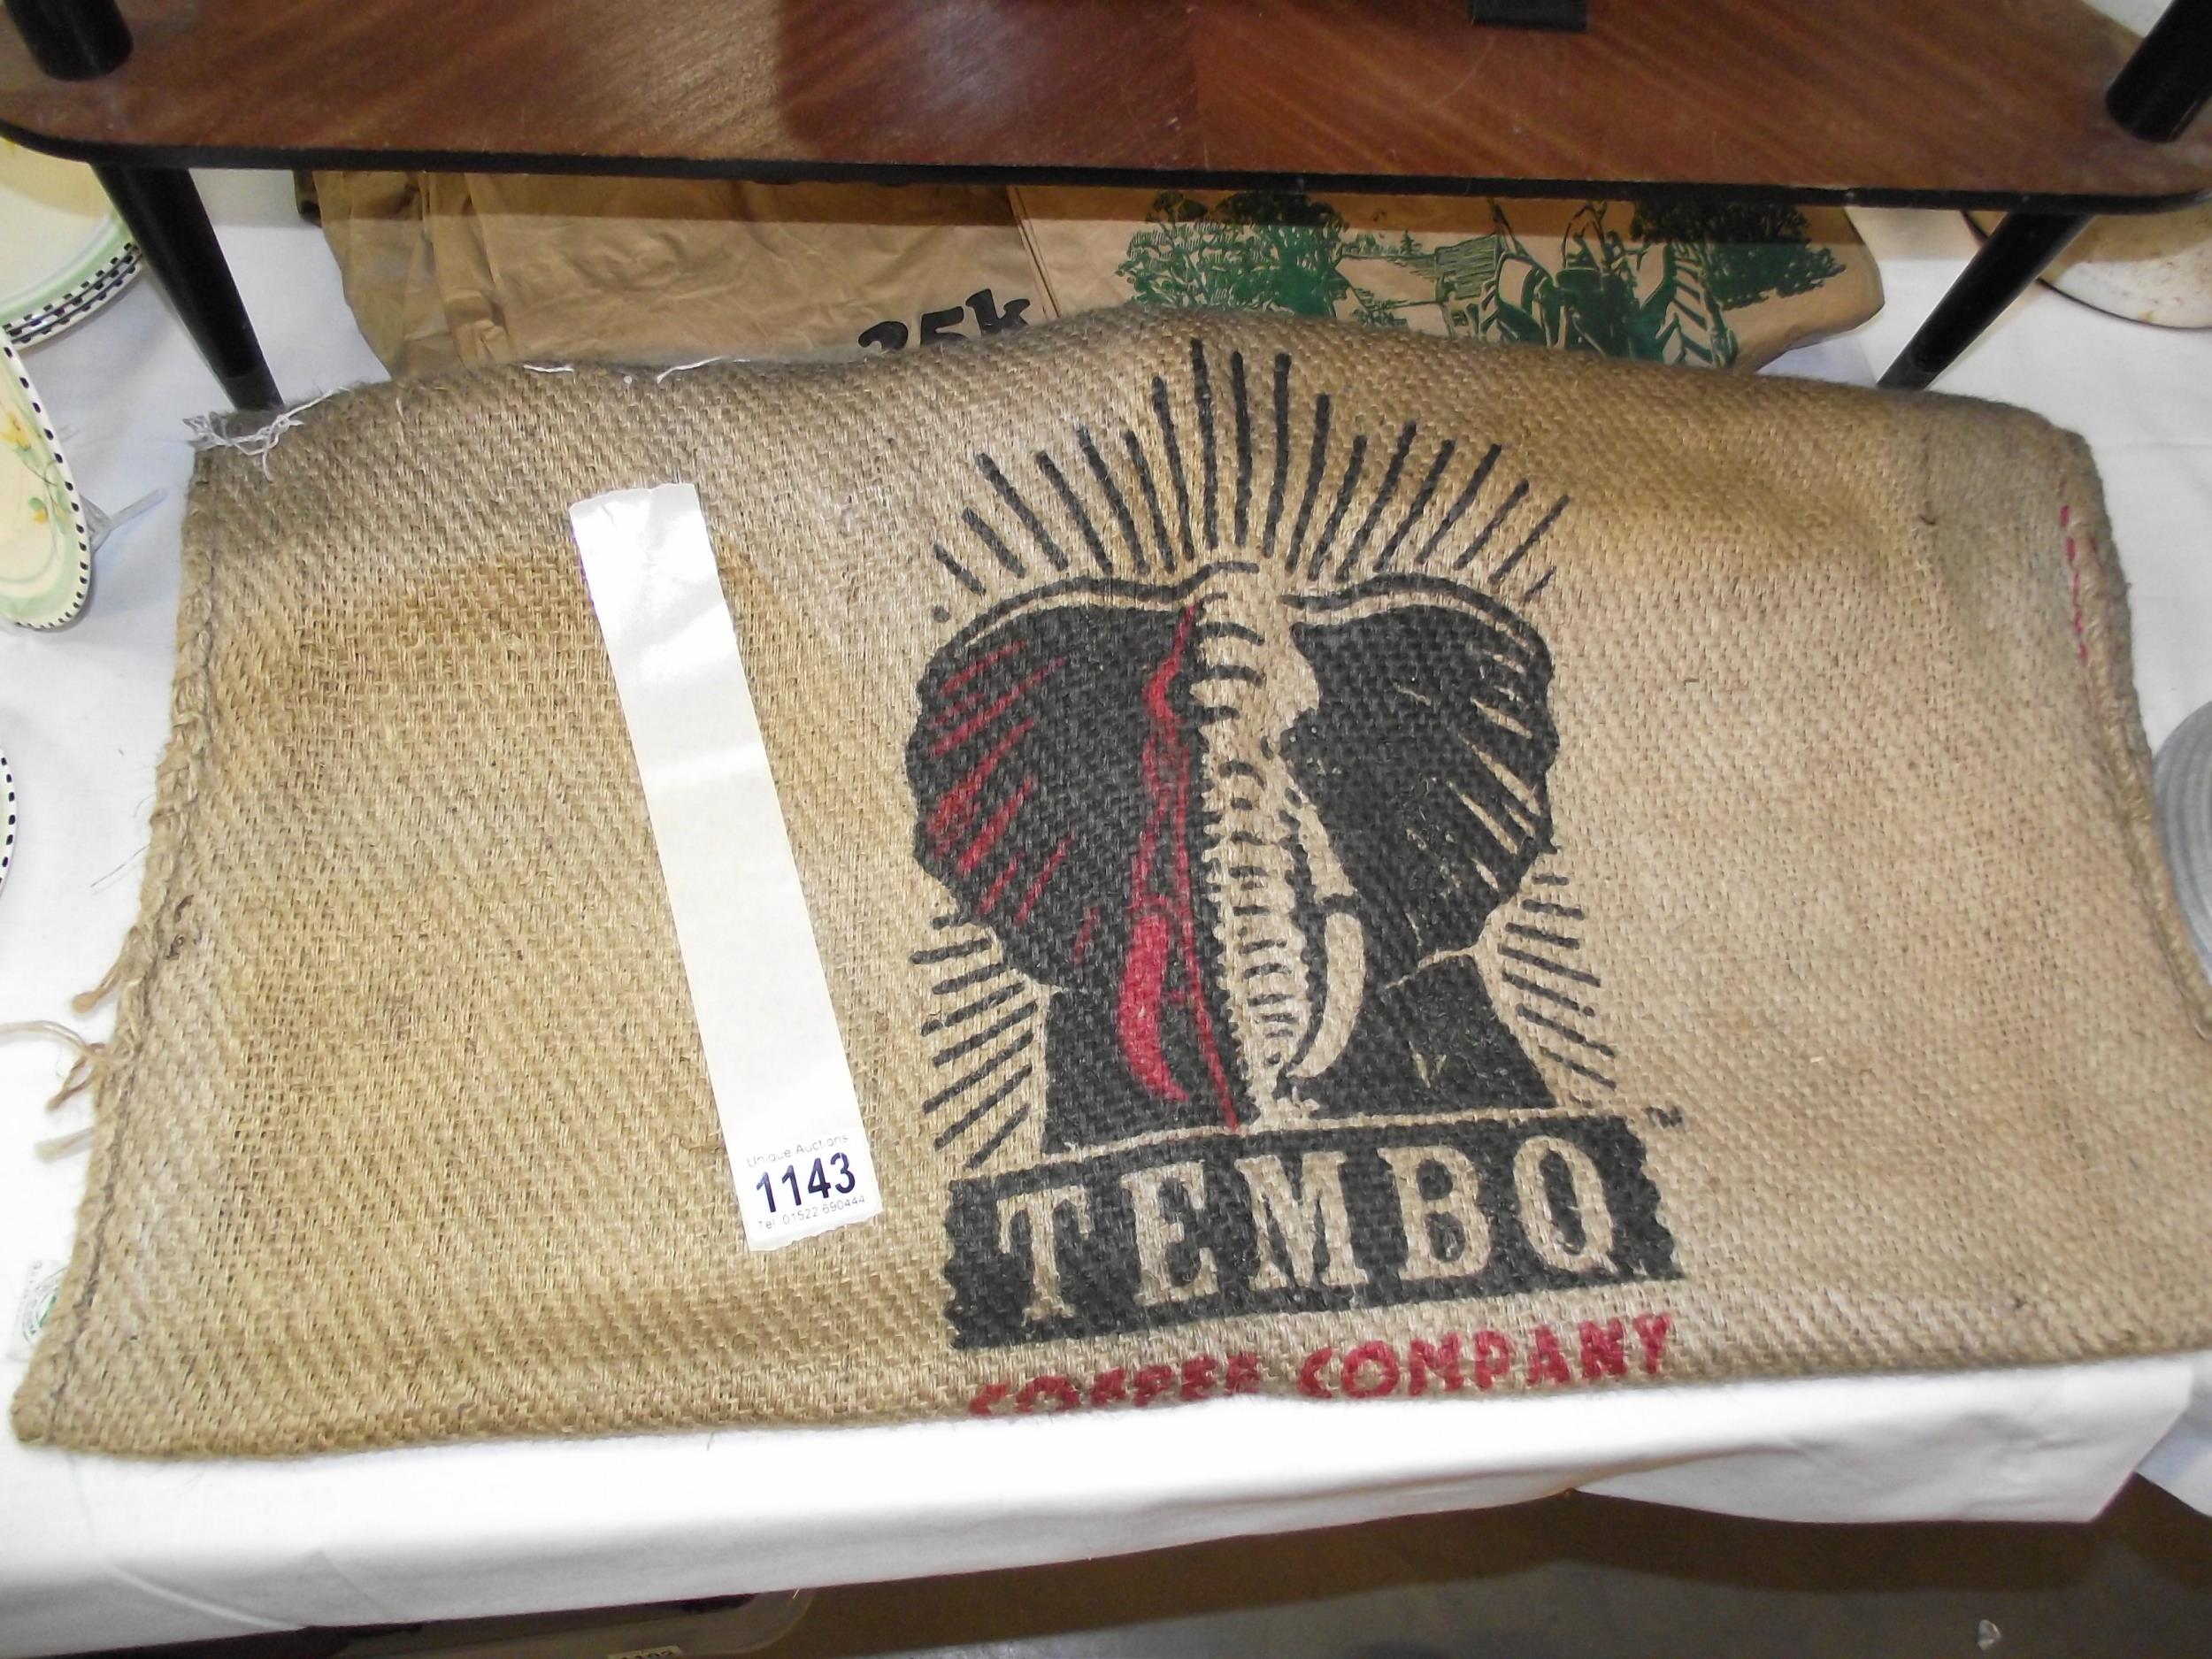 A vintage advertising coffee sack for Tembo coffee company and 2 potato bags